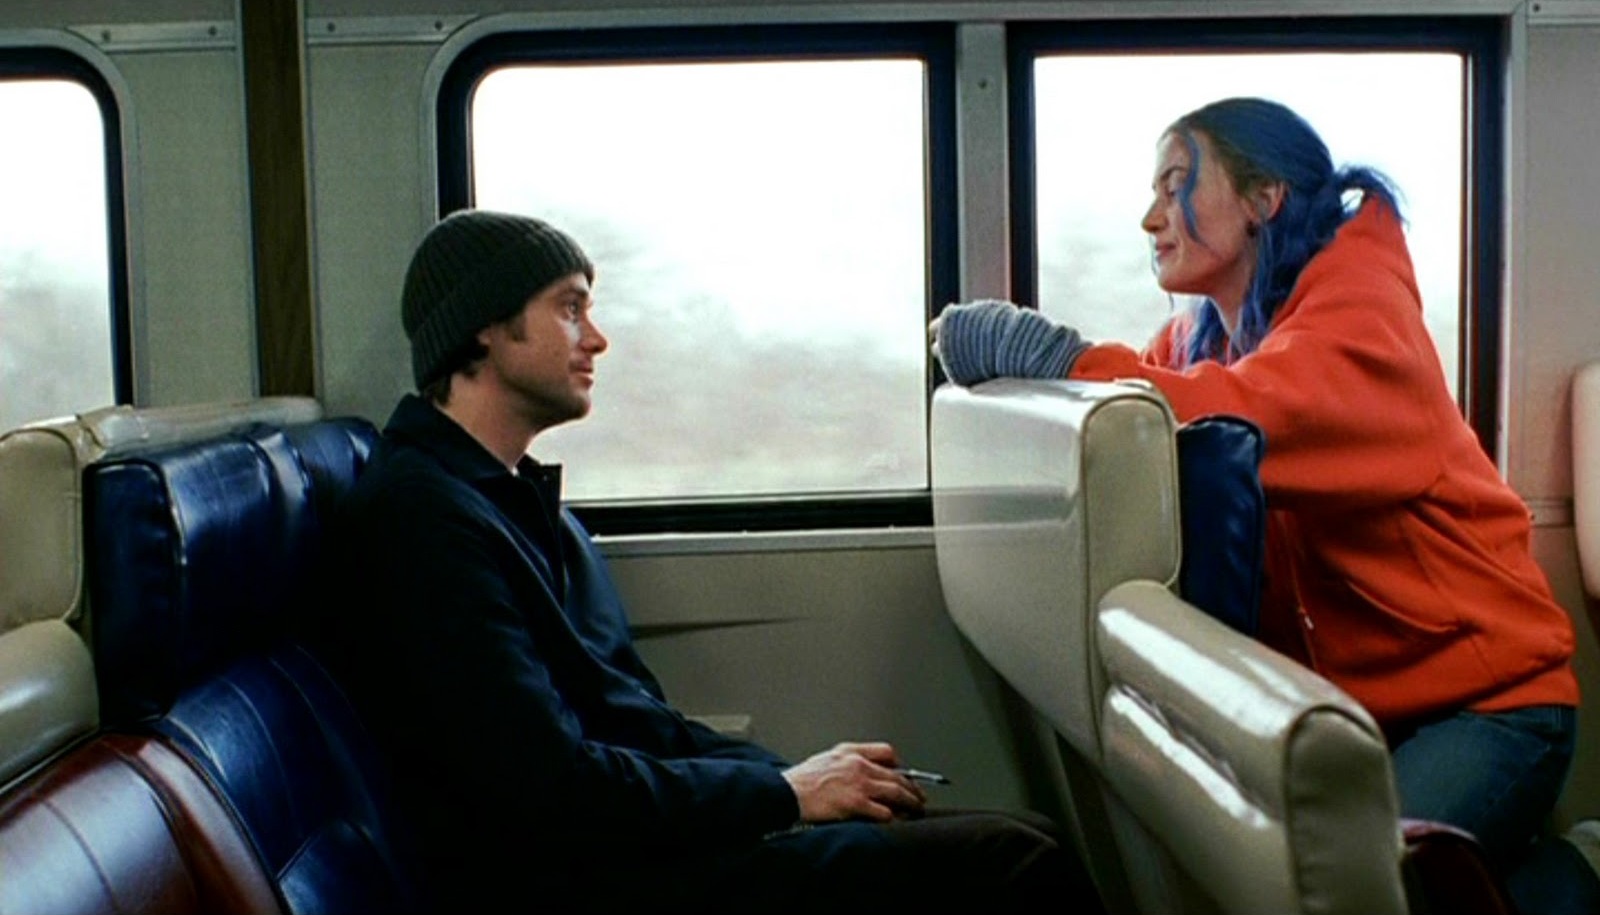 Eternal Sunshine of the Spotless Mind by Charlie Kaufman